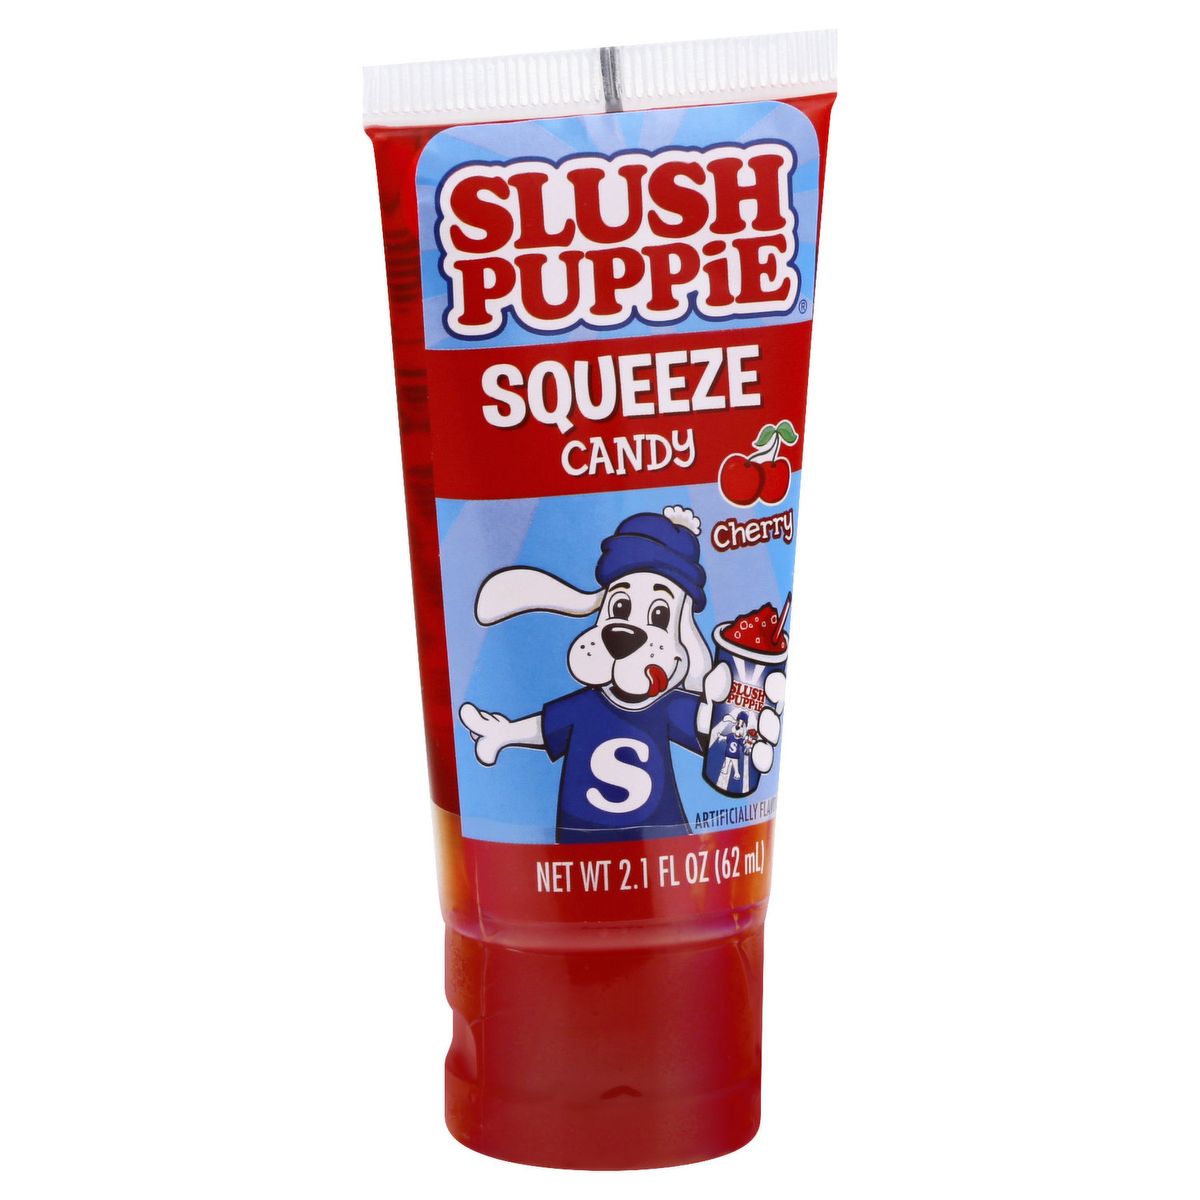 Slush Puppie Squeeze Candy Fruit Flavored Liquid Sweets Snack 62ml Shop Today Get It 4187